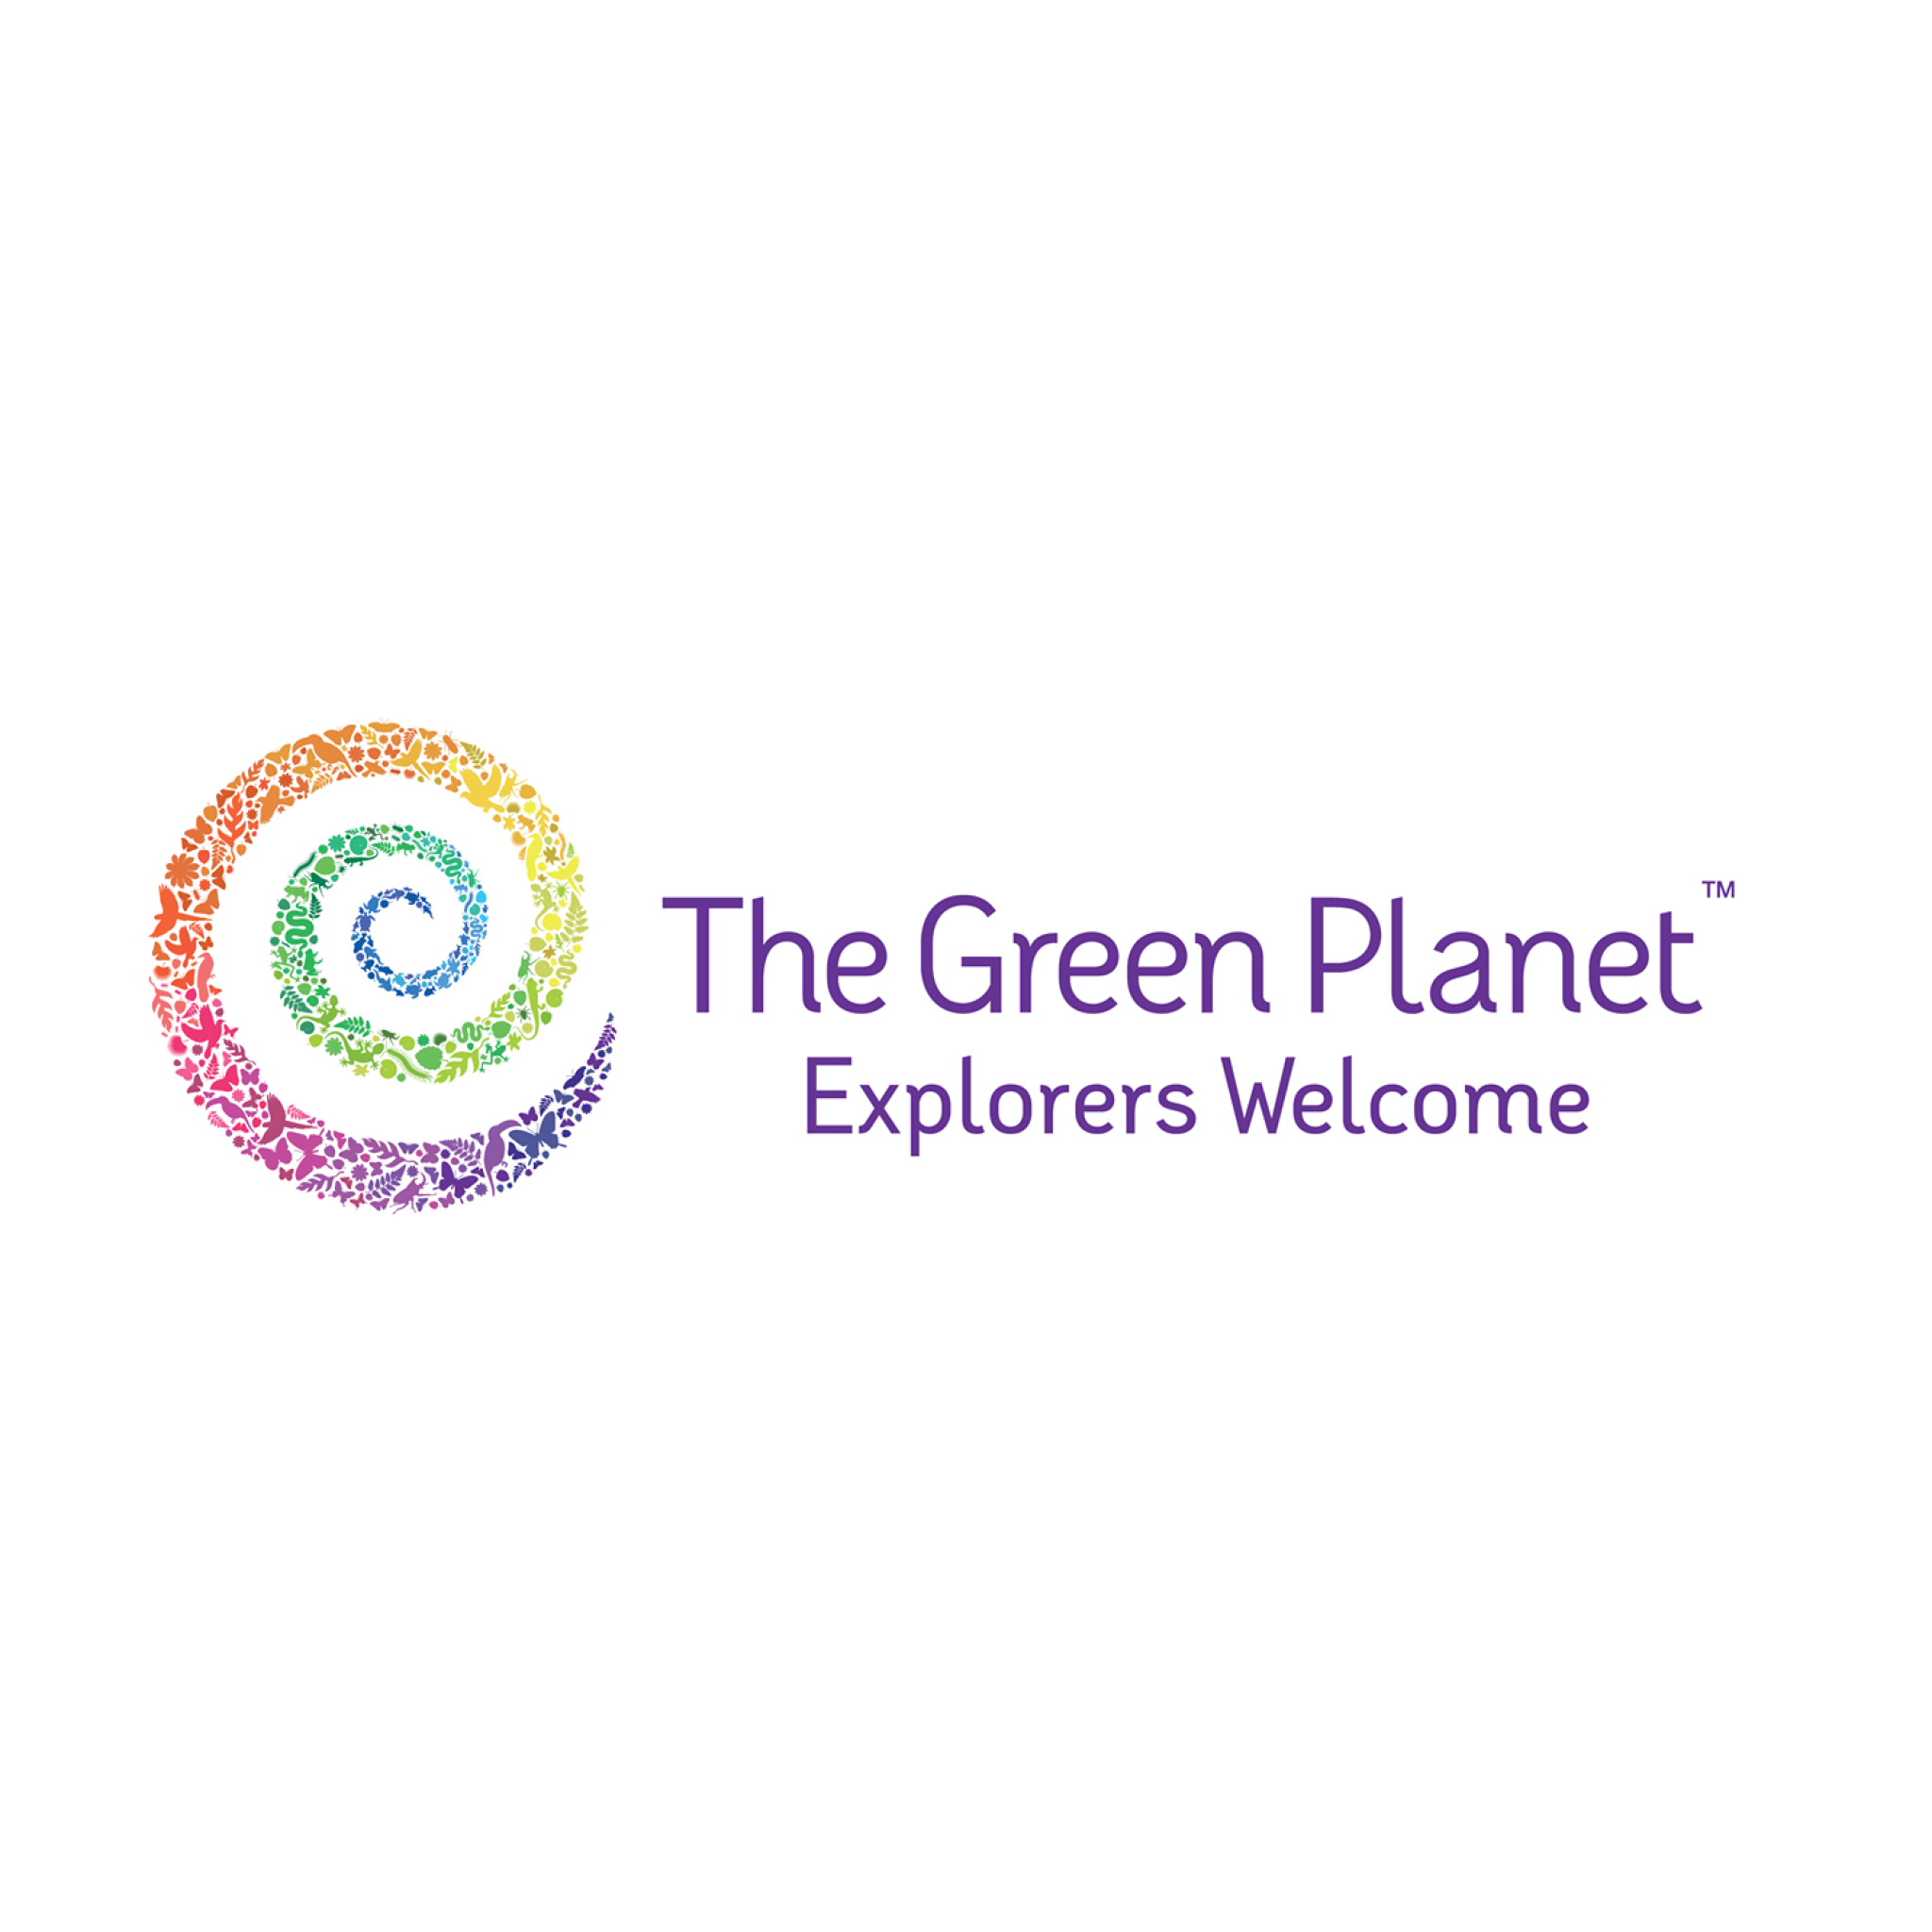  The Green Planet